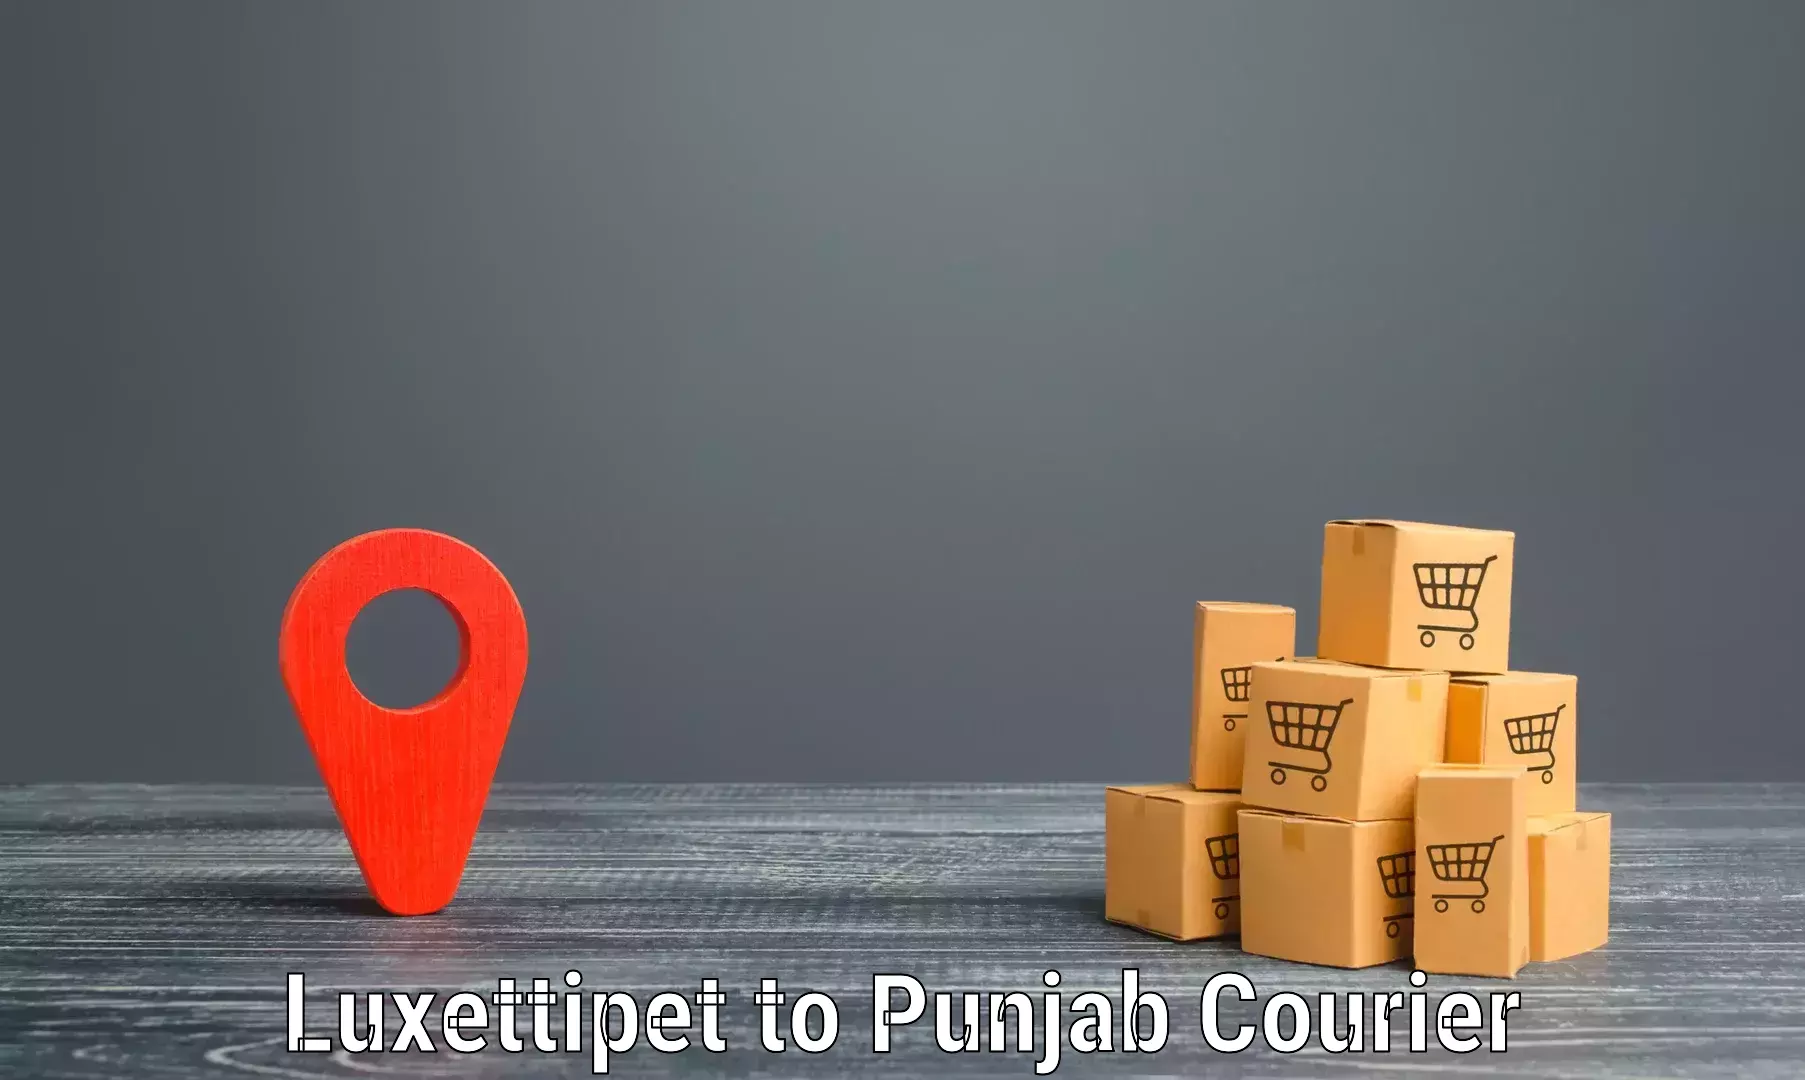 Digital shipping tools in Luxettipet to Jalandhar